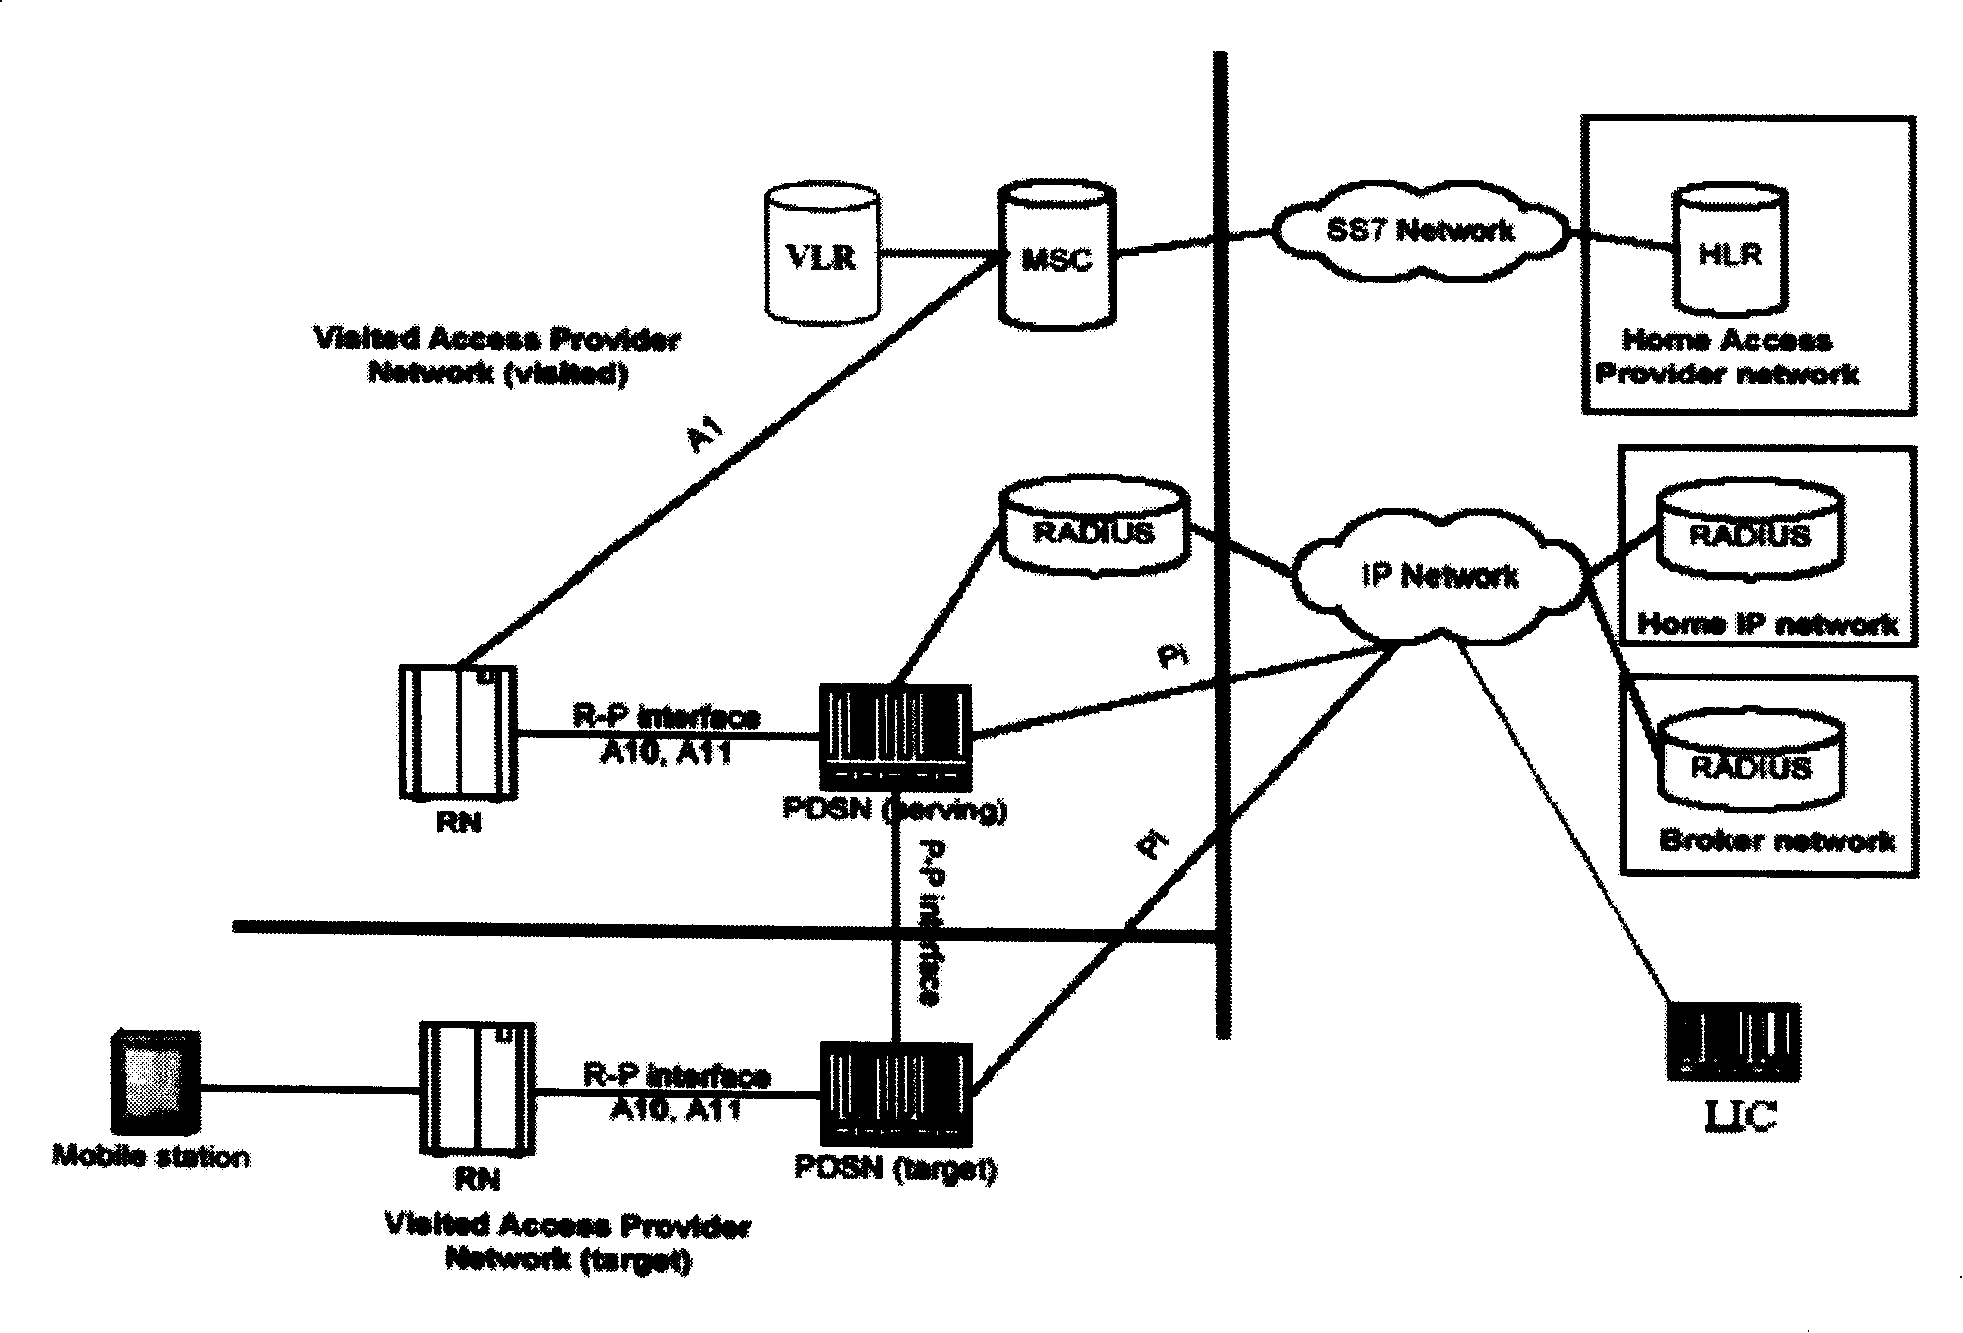 Method for monitoring data traffic based on contents and/or IP address